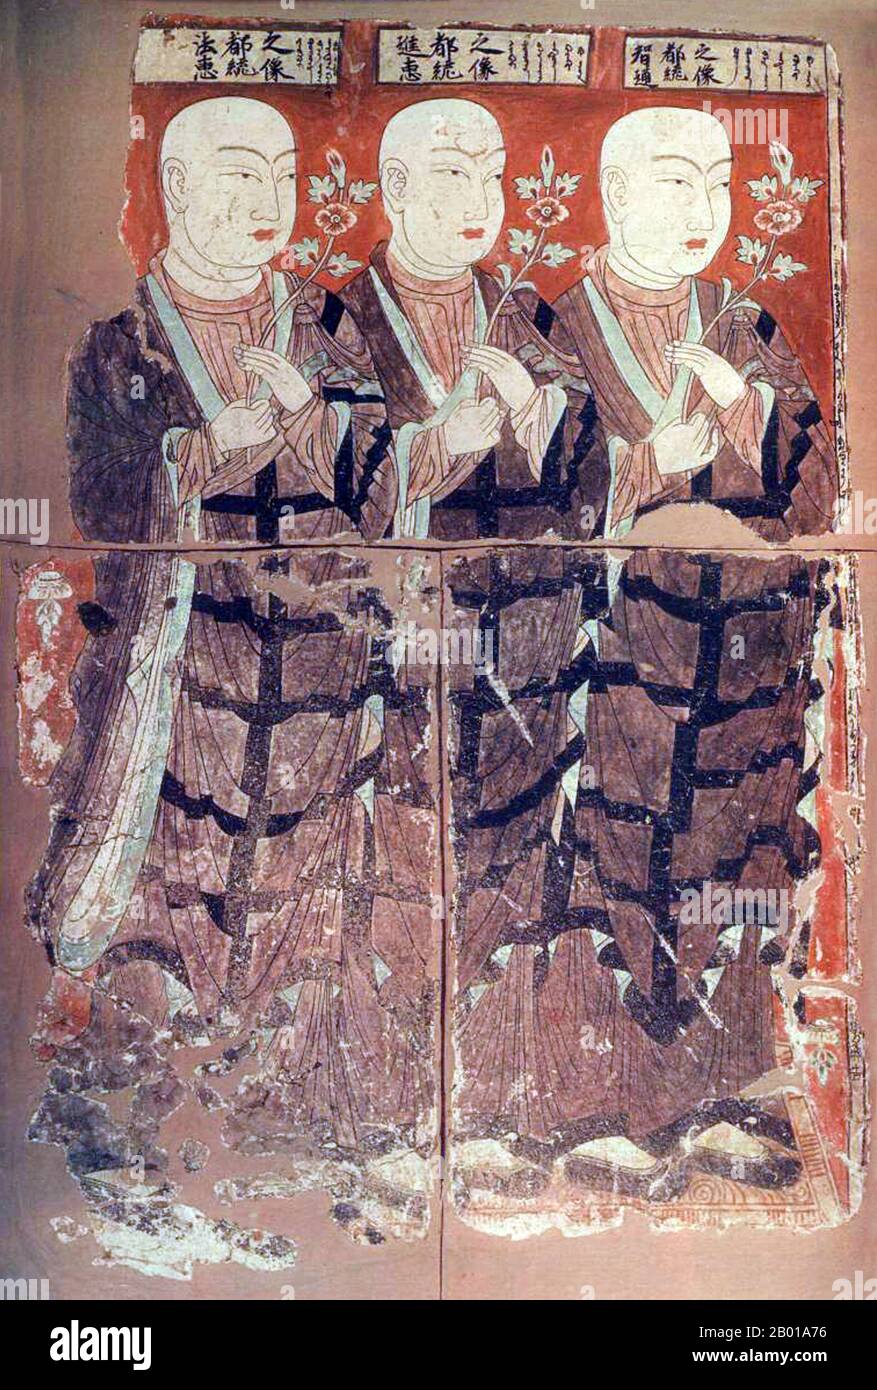 China: Three Manichaean priests. Mural from Gaochang, Turfan, Xinjiang, 8th-9th century.  Manichaeism was one of the major Iranian Gnostic religions, originating in Sassanid Persia. Although most of the original writings of the founding prophet Mani (c. 216–276 AD) have been lost, numerous translations and fragmentary texts have survived.  Manichaeism taught an elaborate cosmology describing the struggle between a good, spiritual world of light, and an evil, material world of darkness. Stock Photo